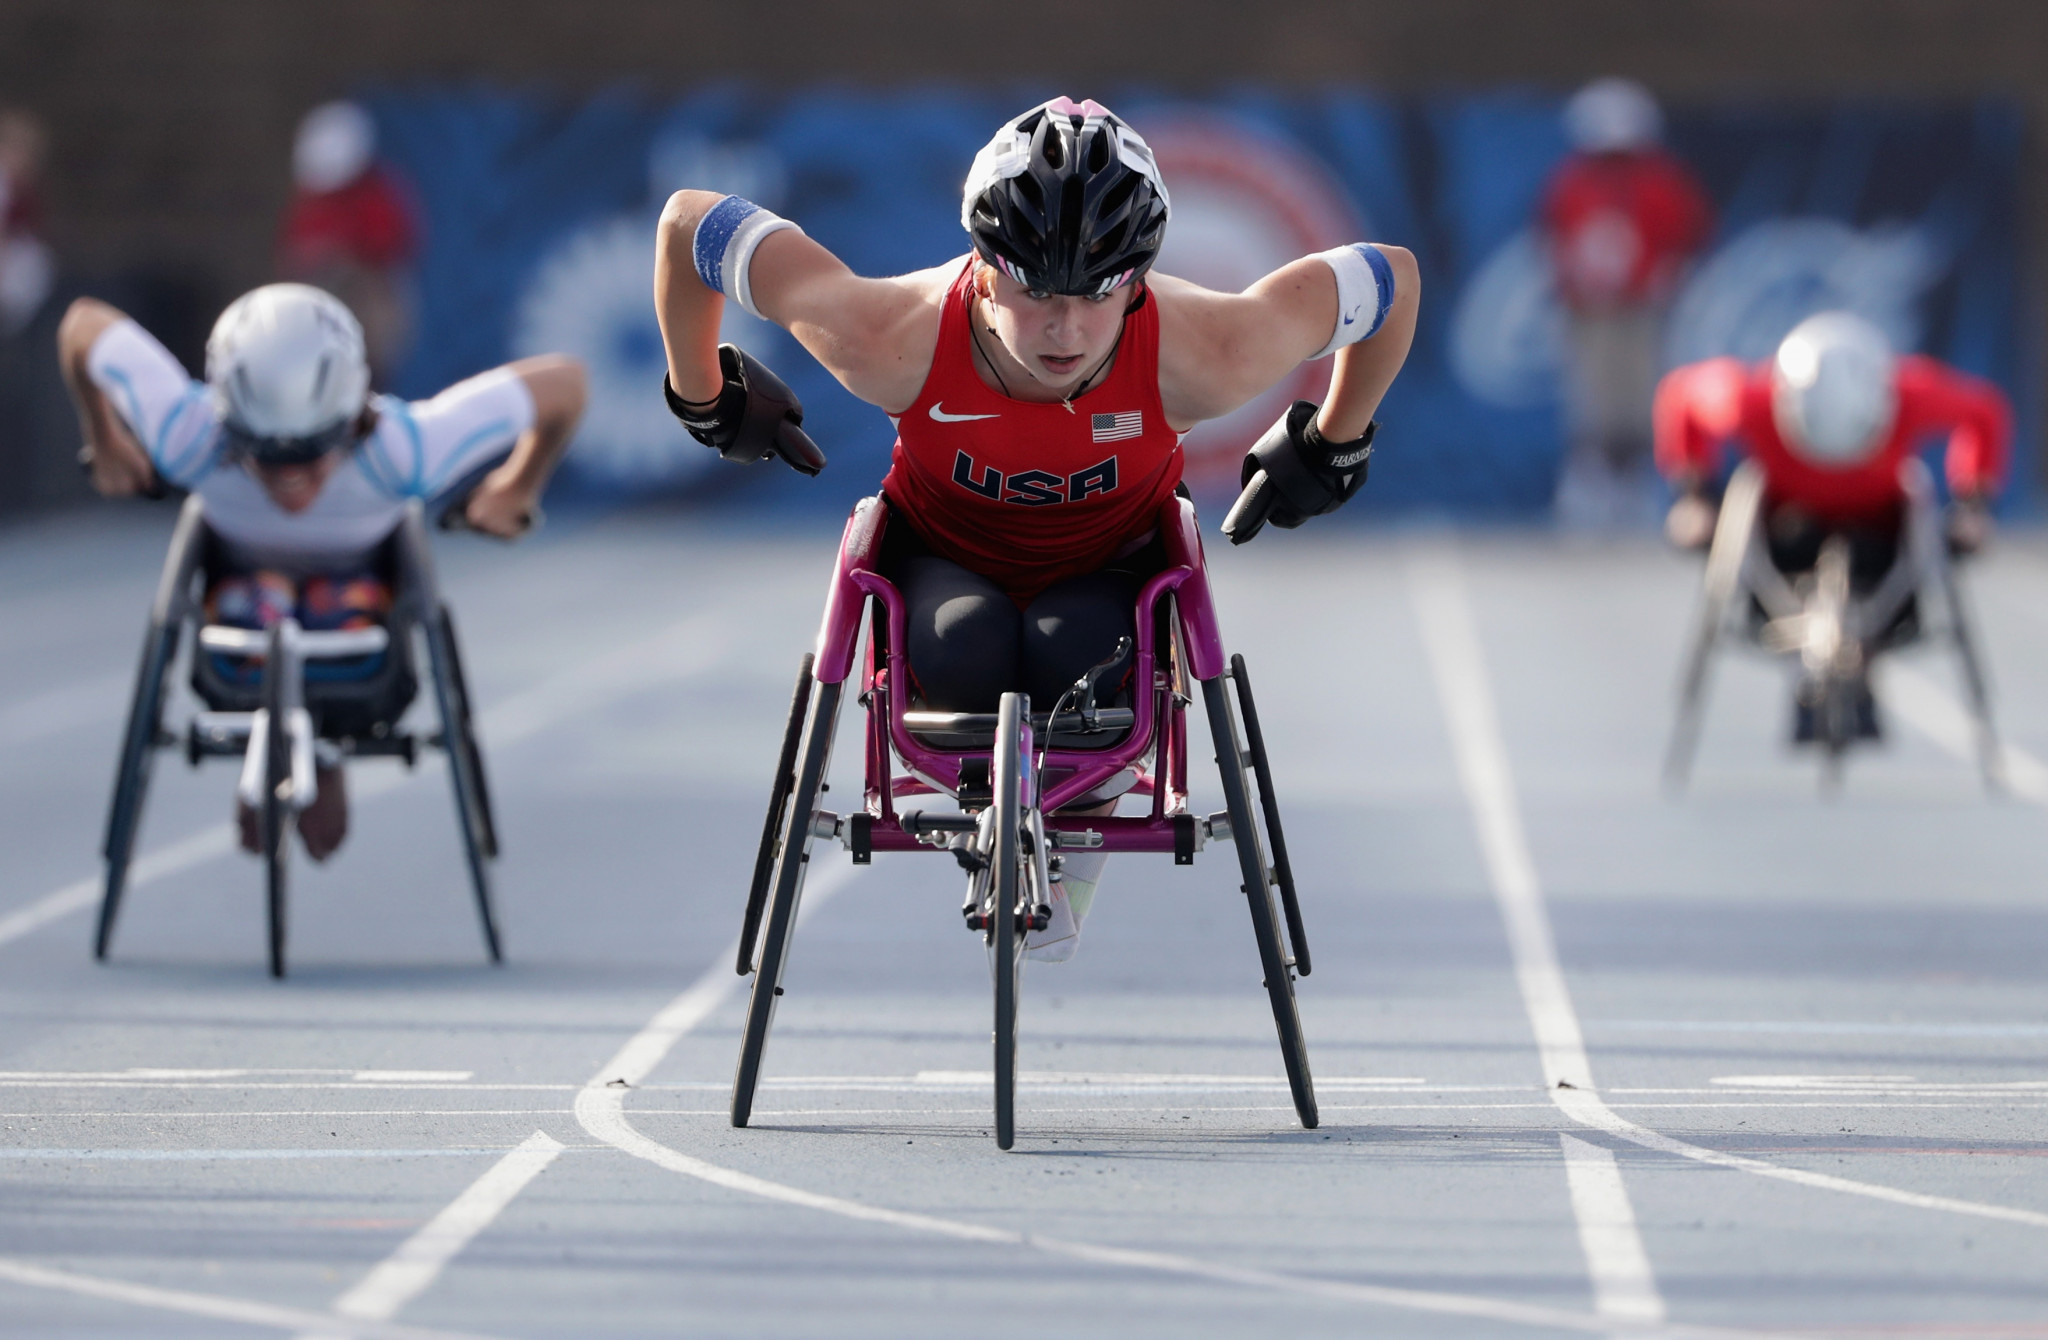 Alexa Halko was named Female Track Athlete of the Year having won three medals at the 2017 World Para Athletics Championships in London ©Getty Images